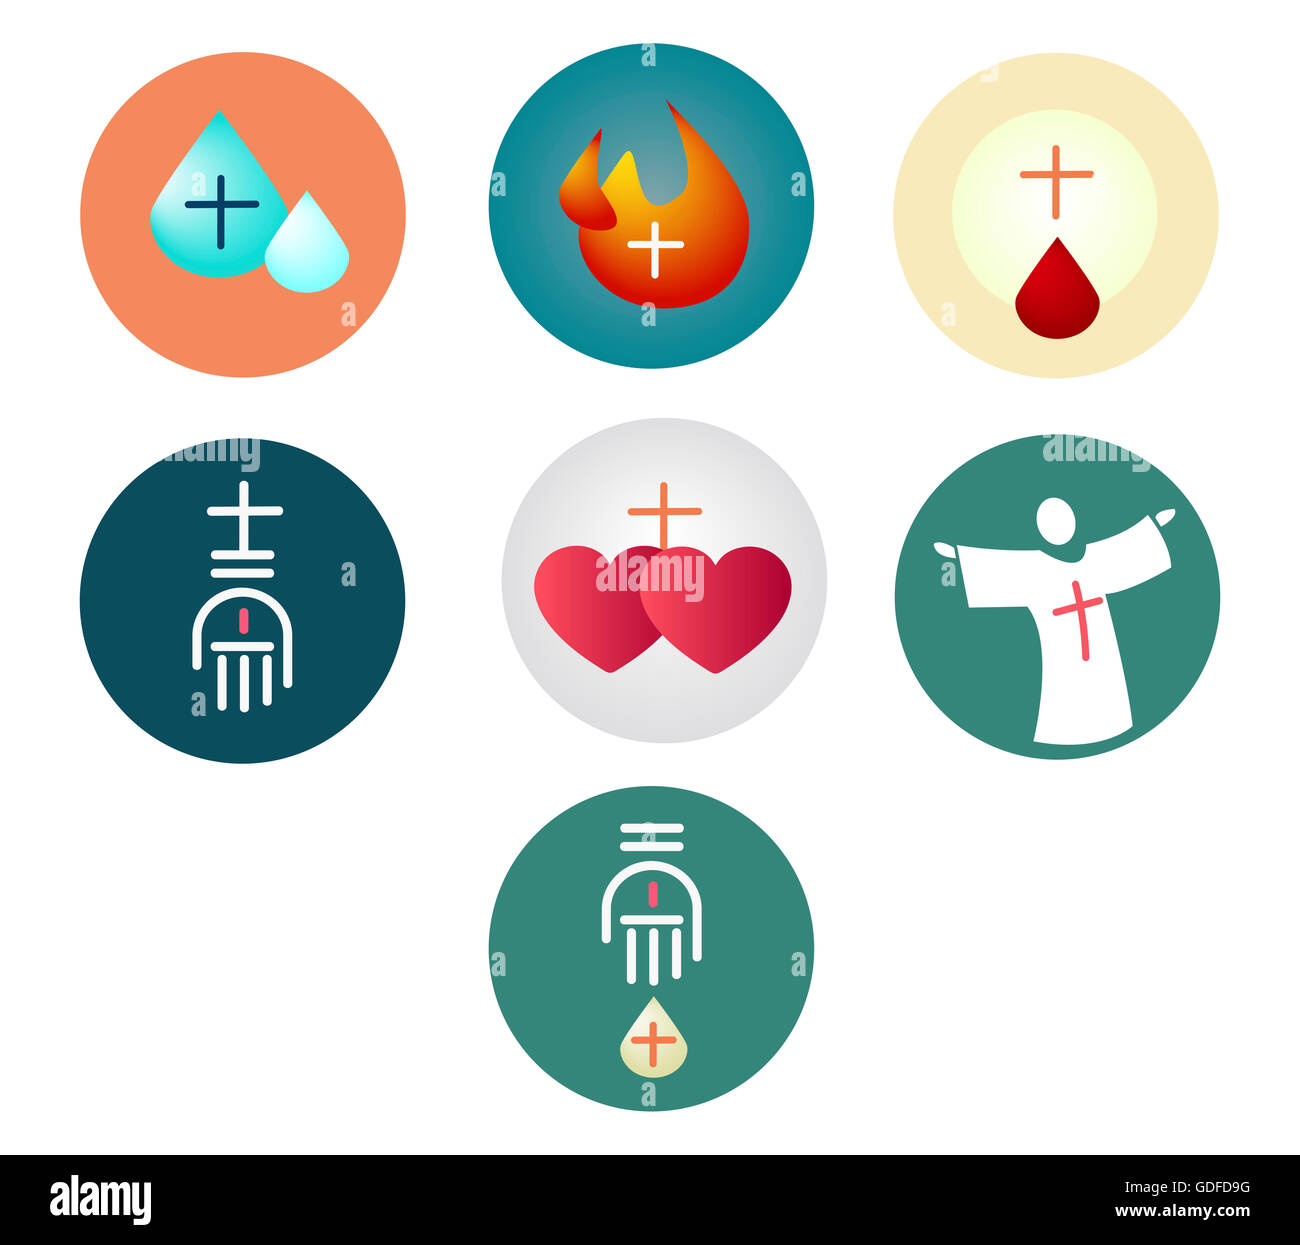 Vector illustration or drawing of the 7 Sacraments of the Christian